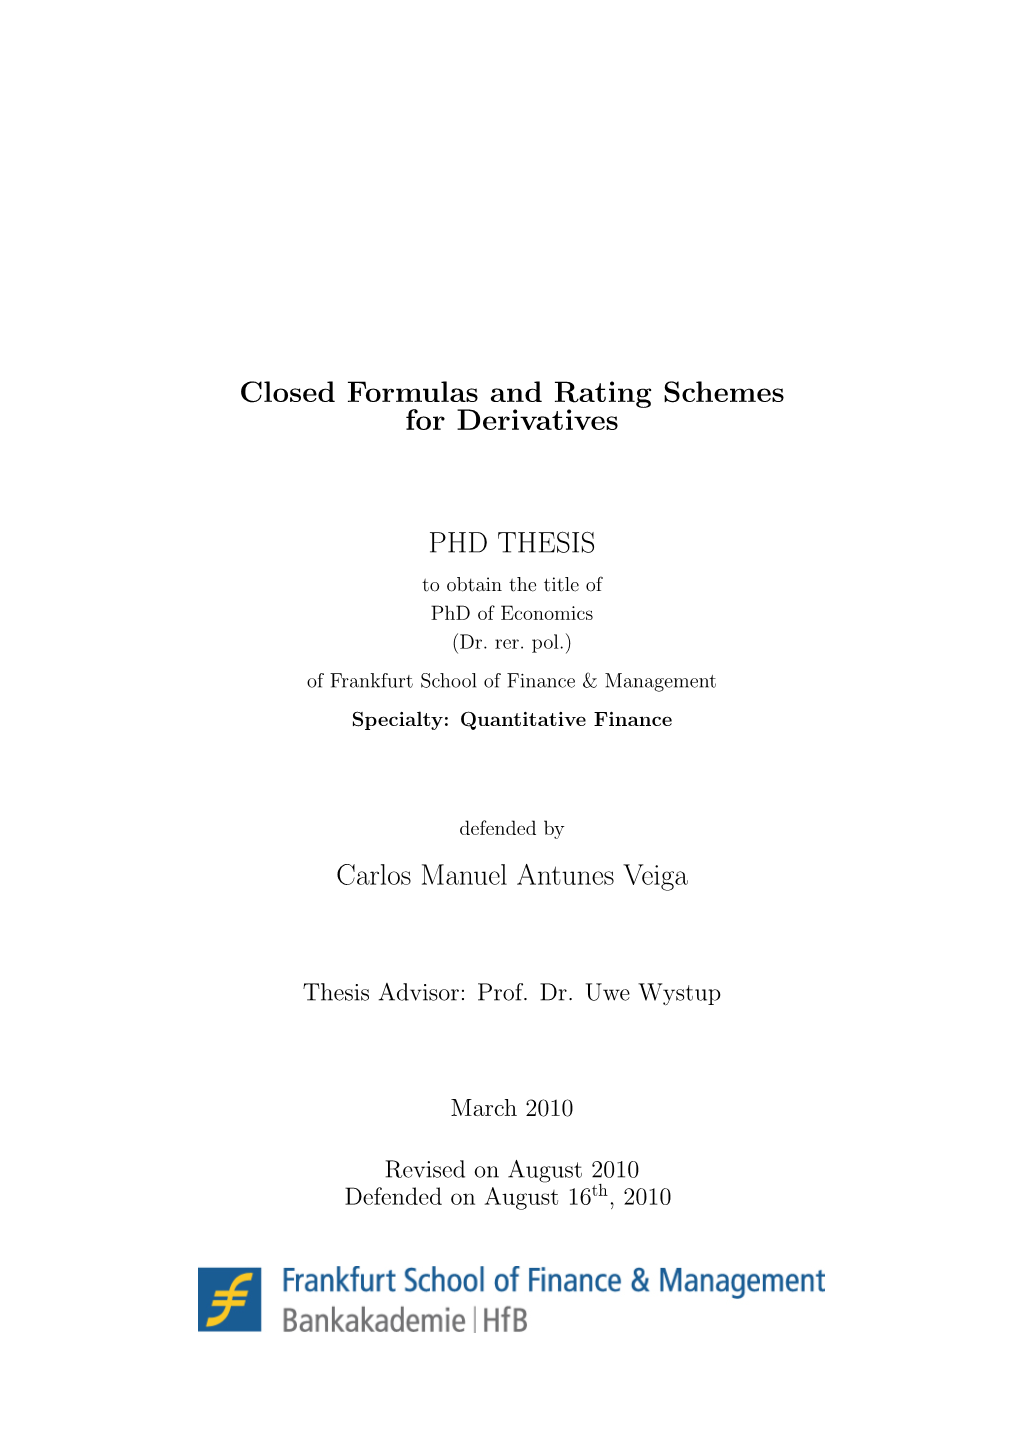 Closed Formulas and Rating Schemes for Derivatives PHD THESIS Carlos Manuel Antunes Veiga